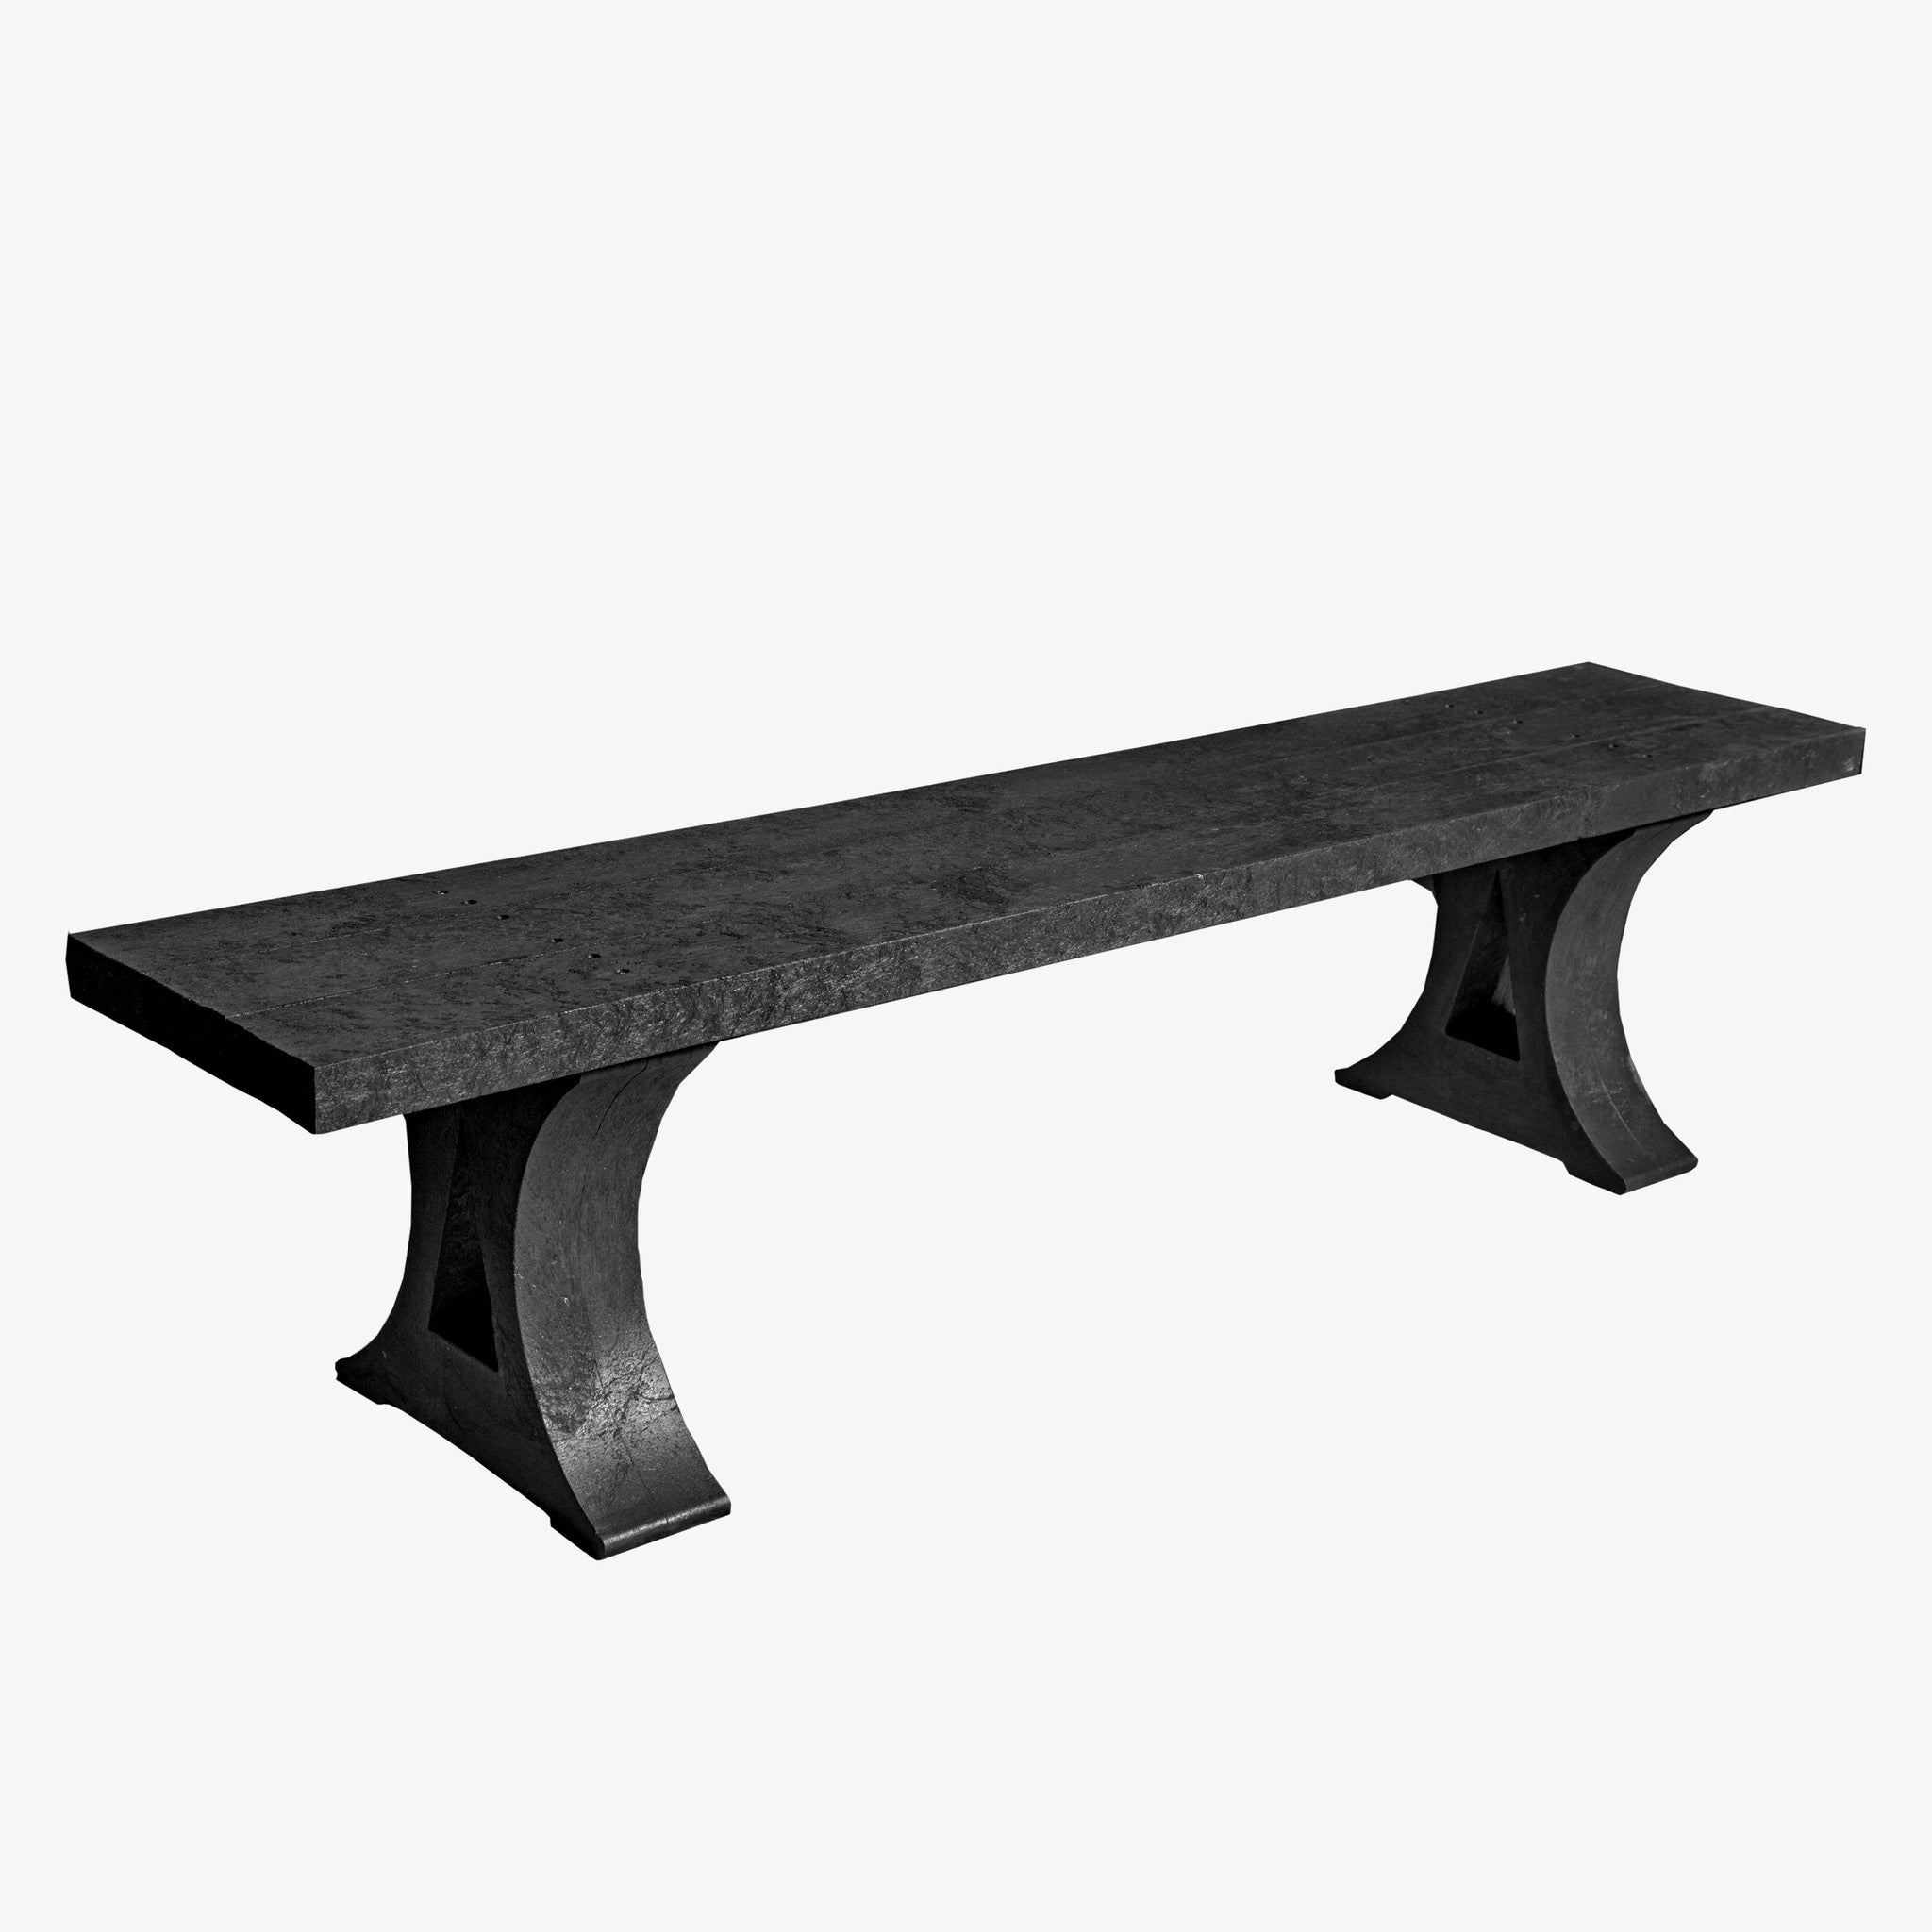 Manticore Lumber black recycled plastic bench